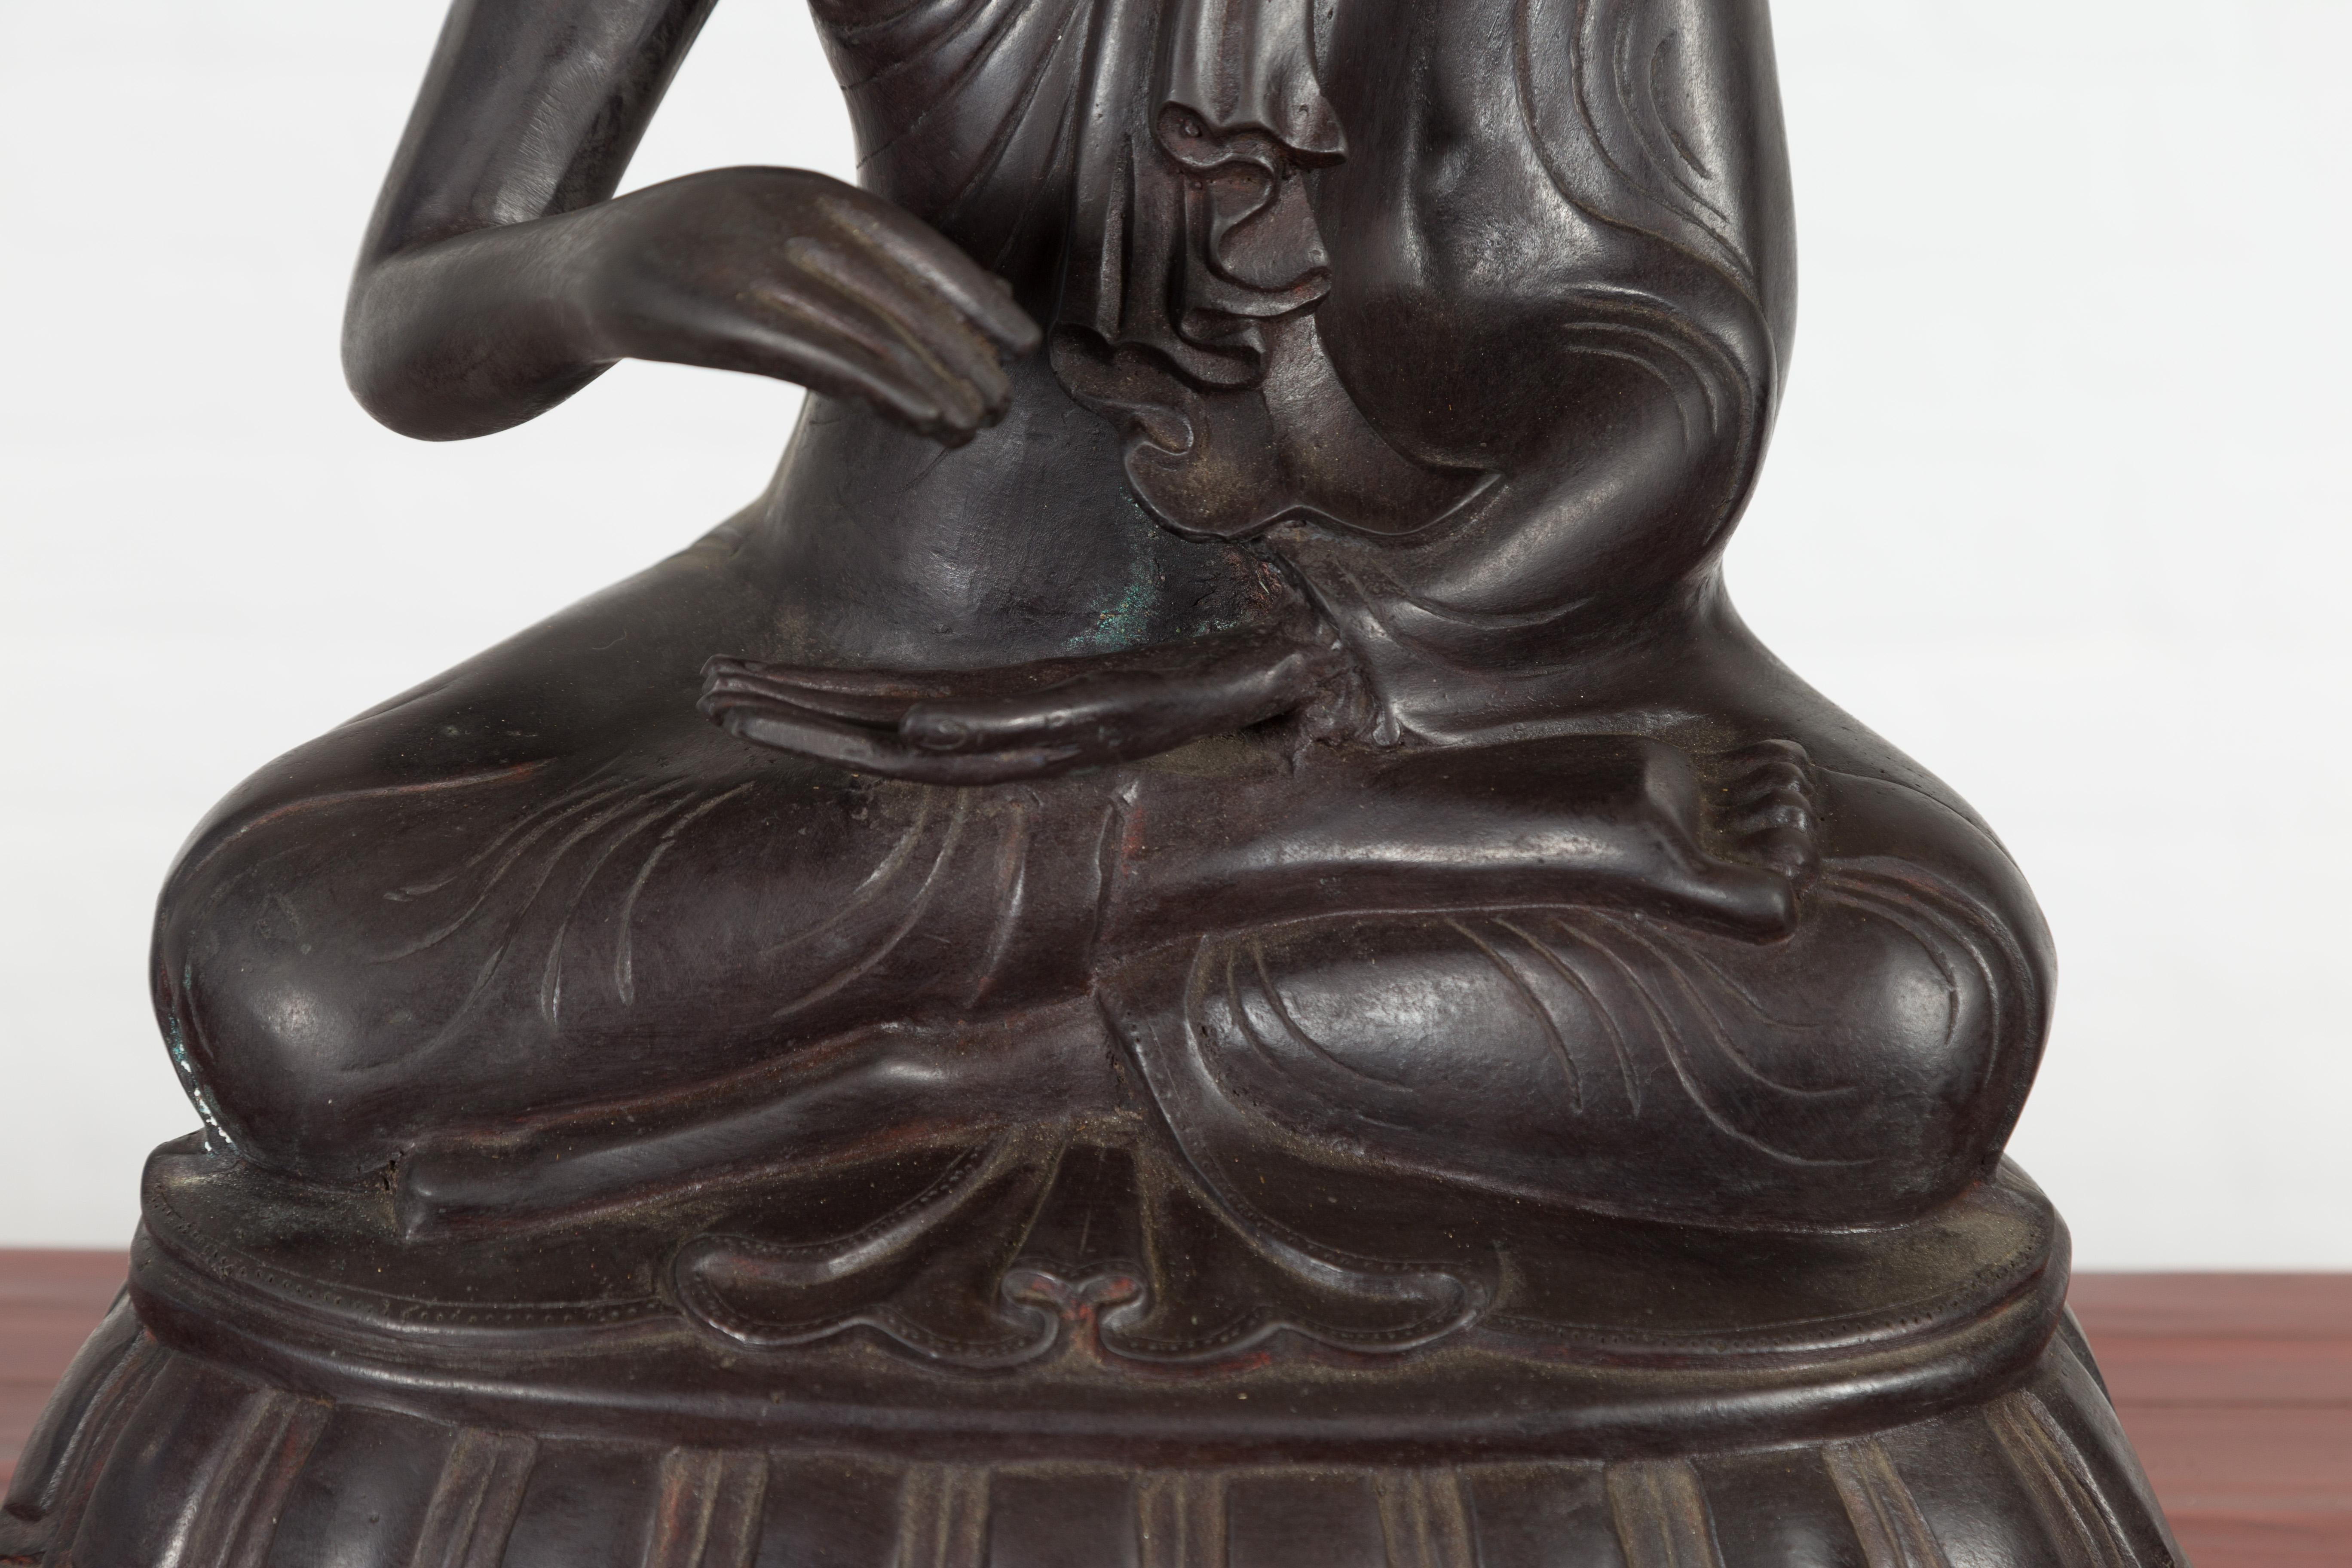 Vintage Bronze Lost Wax Sculpture Depicting a Praying Monk Sitting on a Base For Sale 3